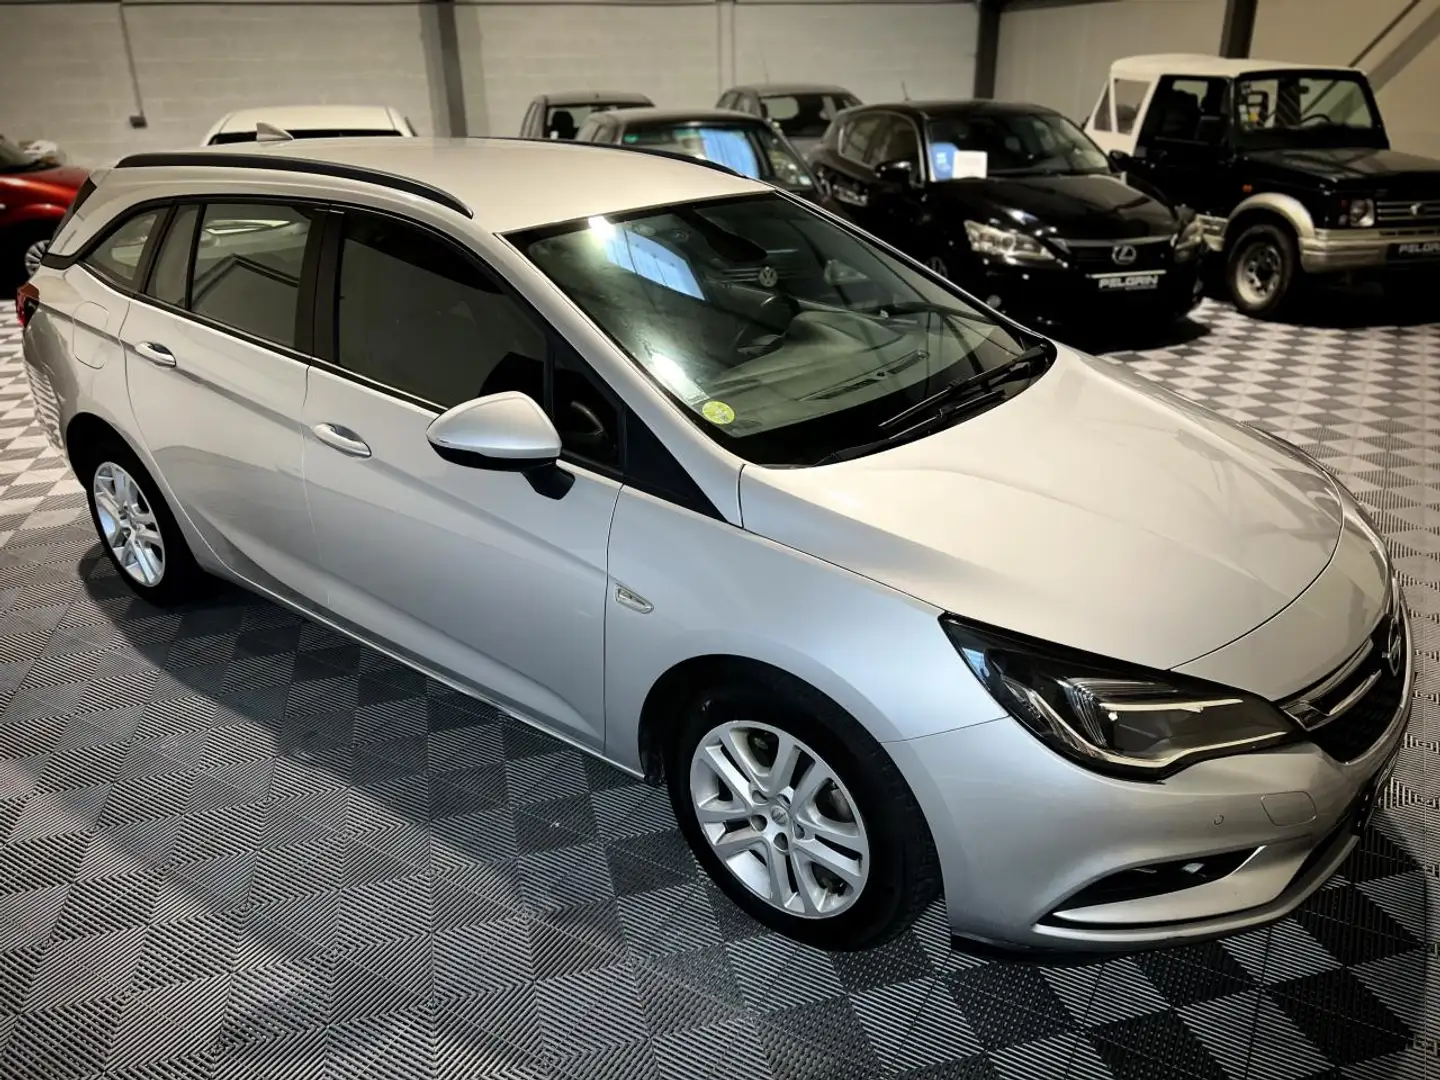 Opel Astra Sports Tourer 1.6 Cdti 110 Ch finition Edition - S Gris - 2